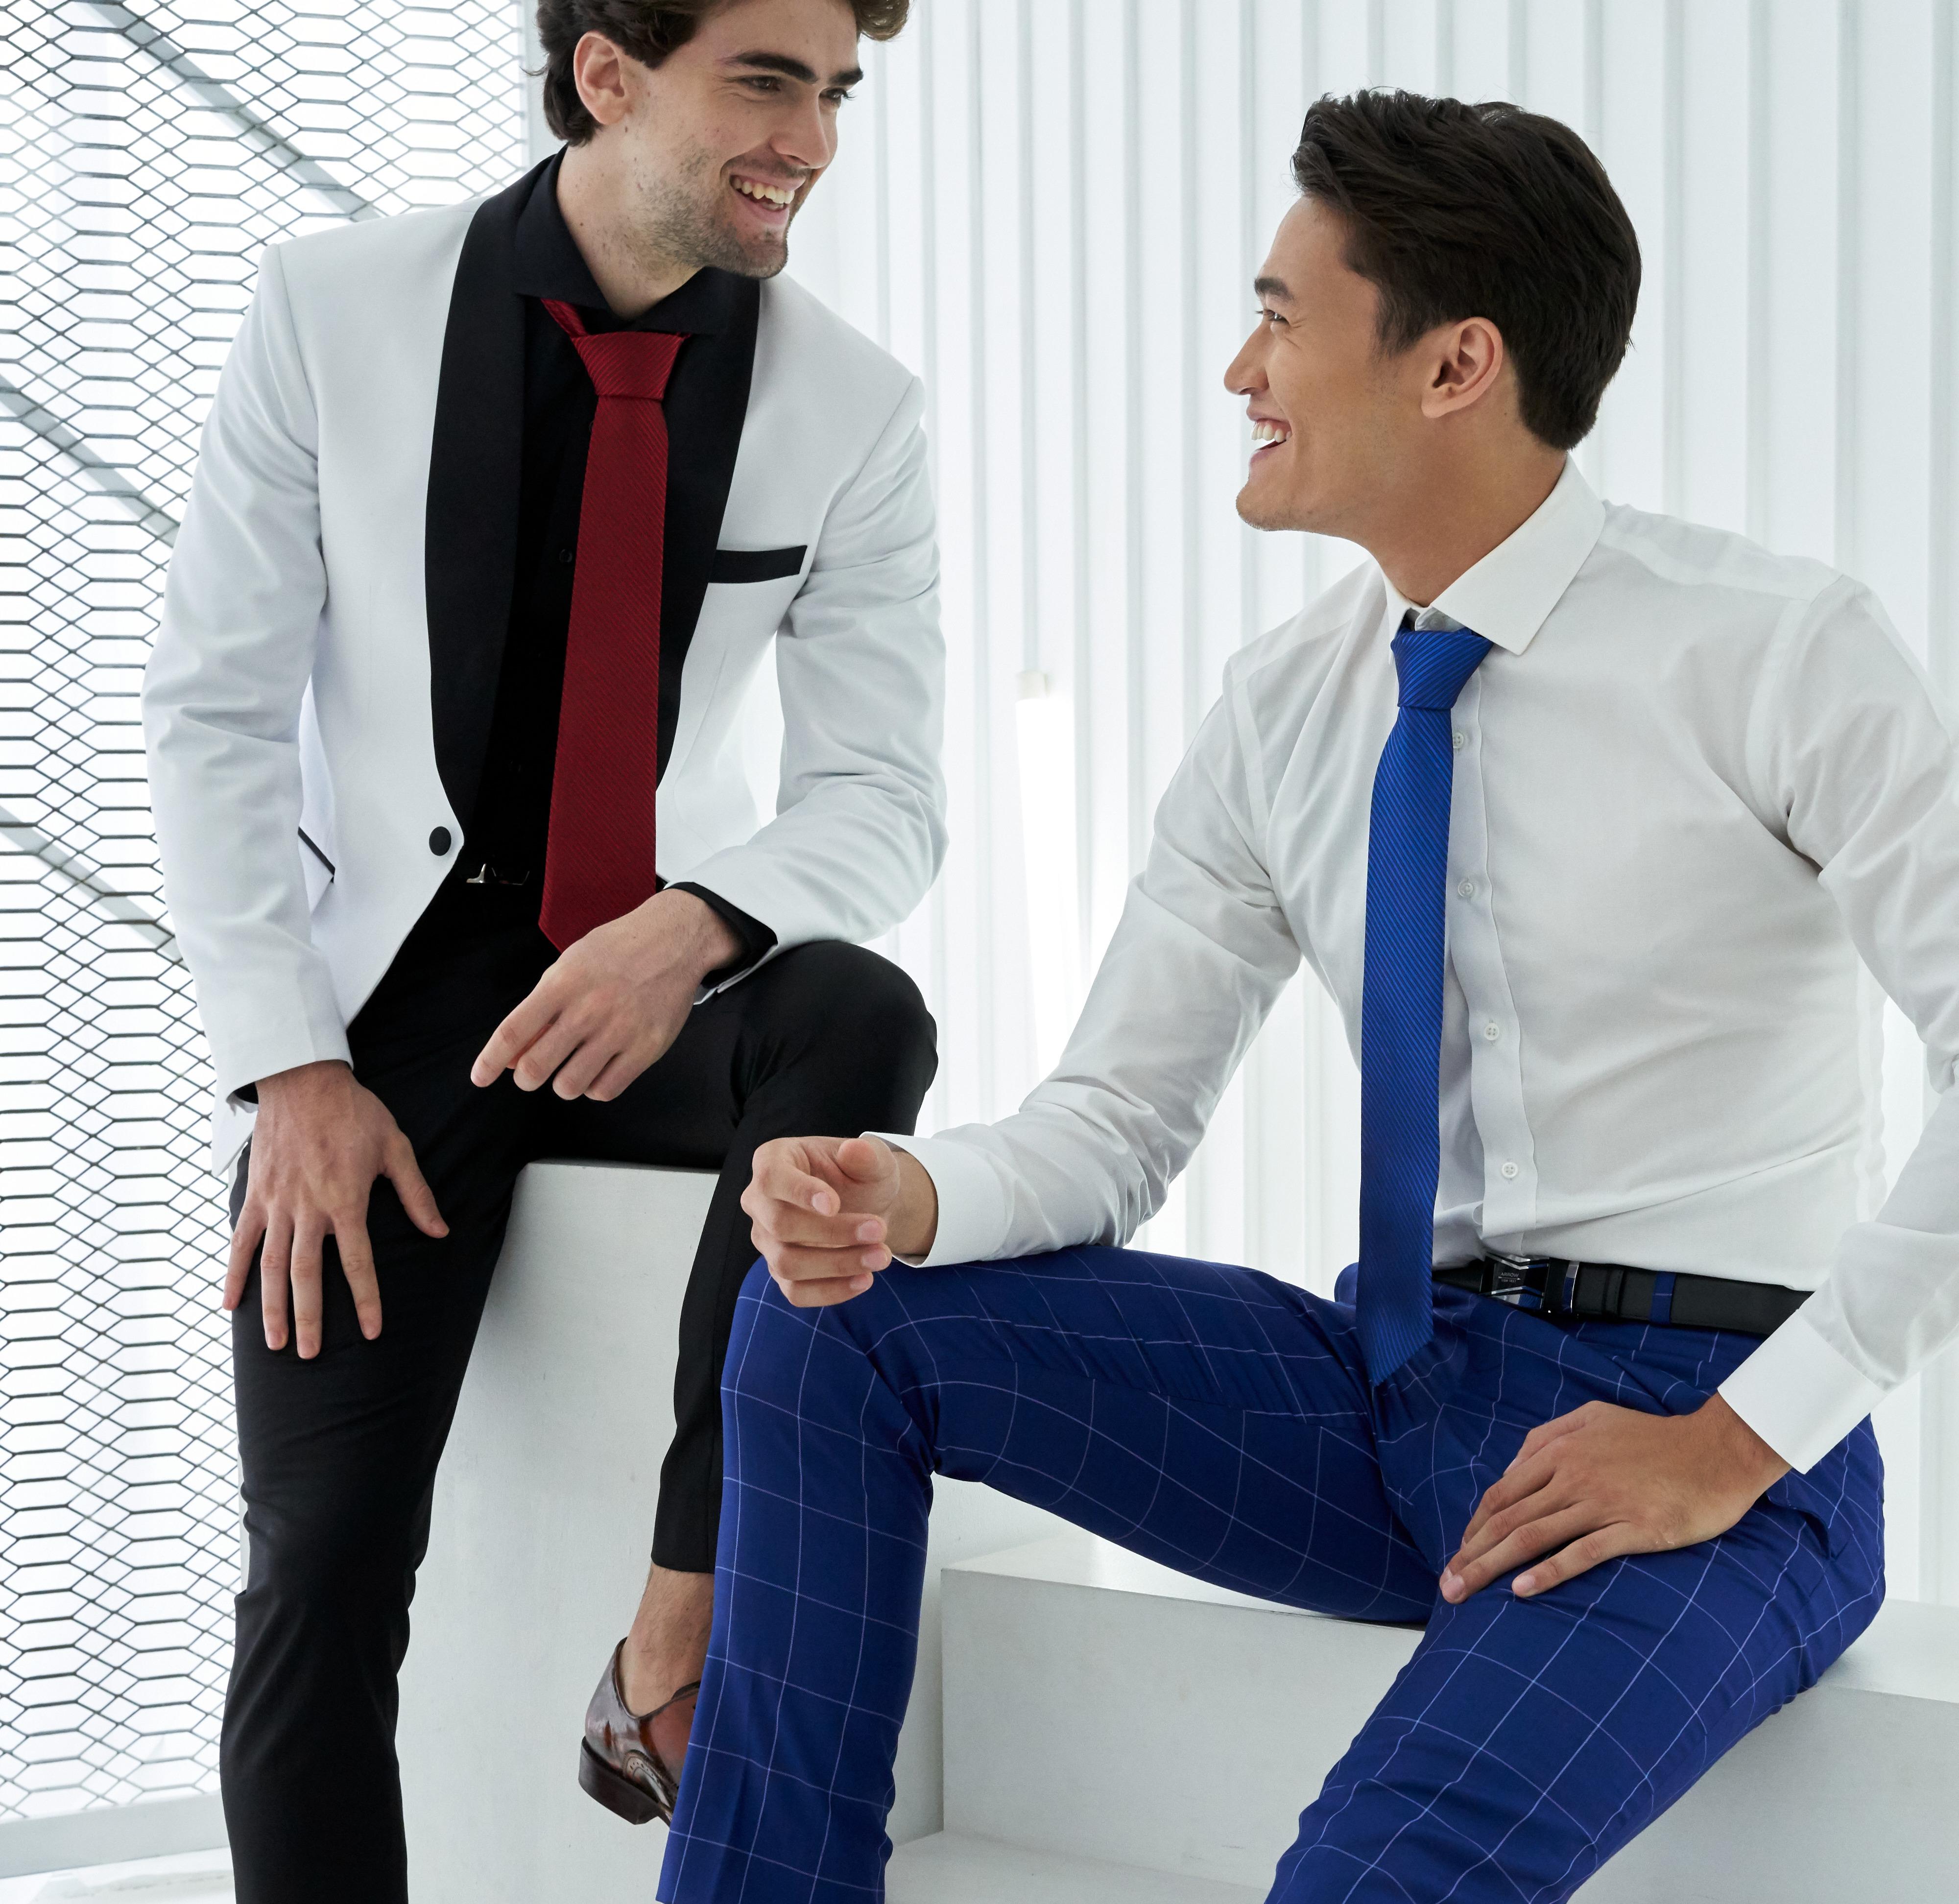 Two white men talking to each other. One is wearing a black tailored shirt with a custom made white jacket and a red tie. The other is wearing blue checkered pants, a white shirt and a blue tie.